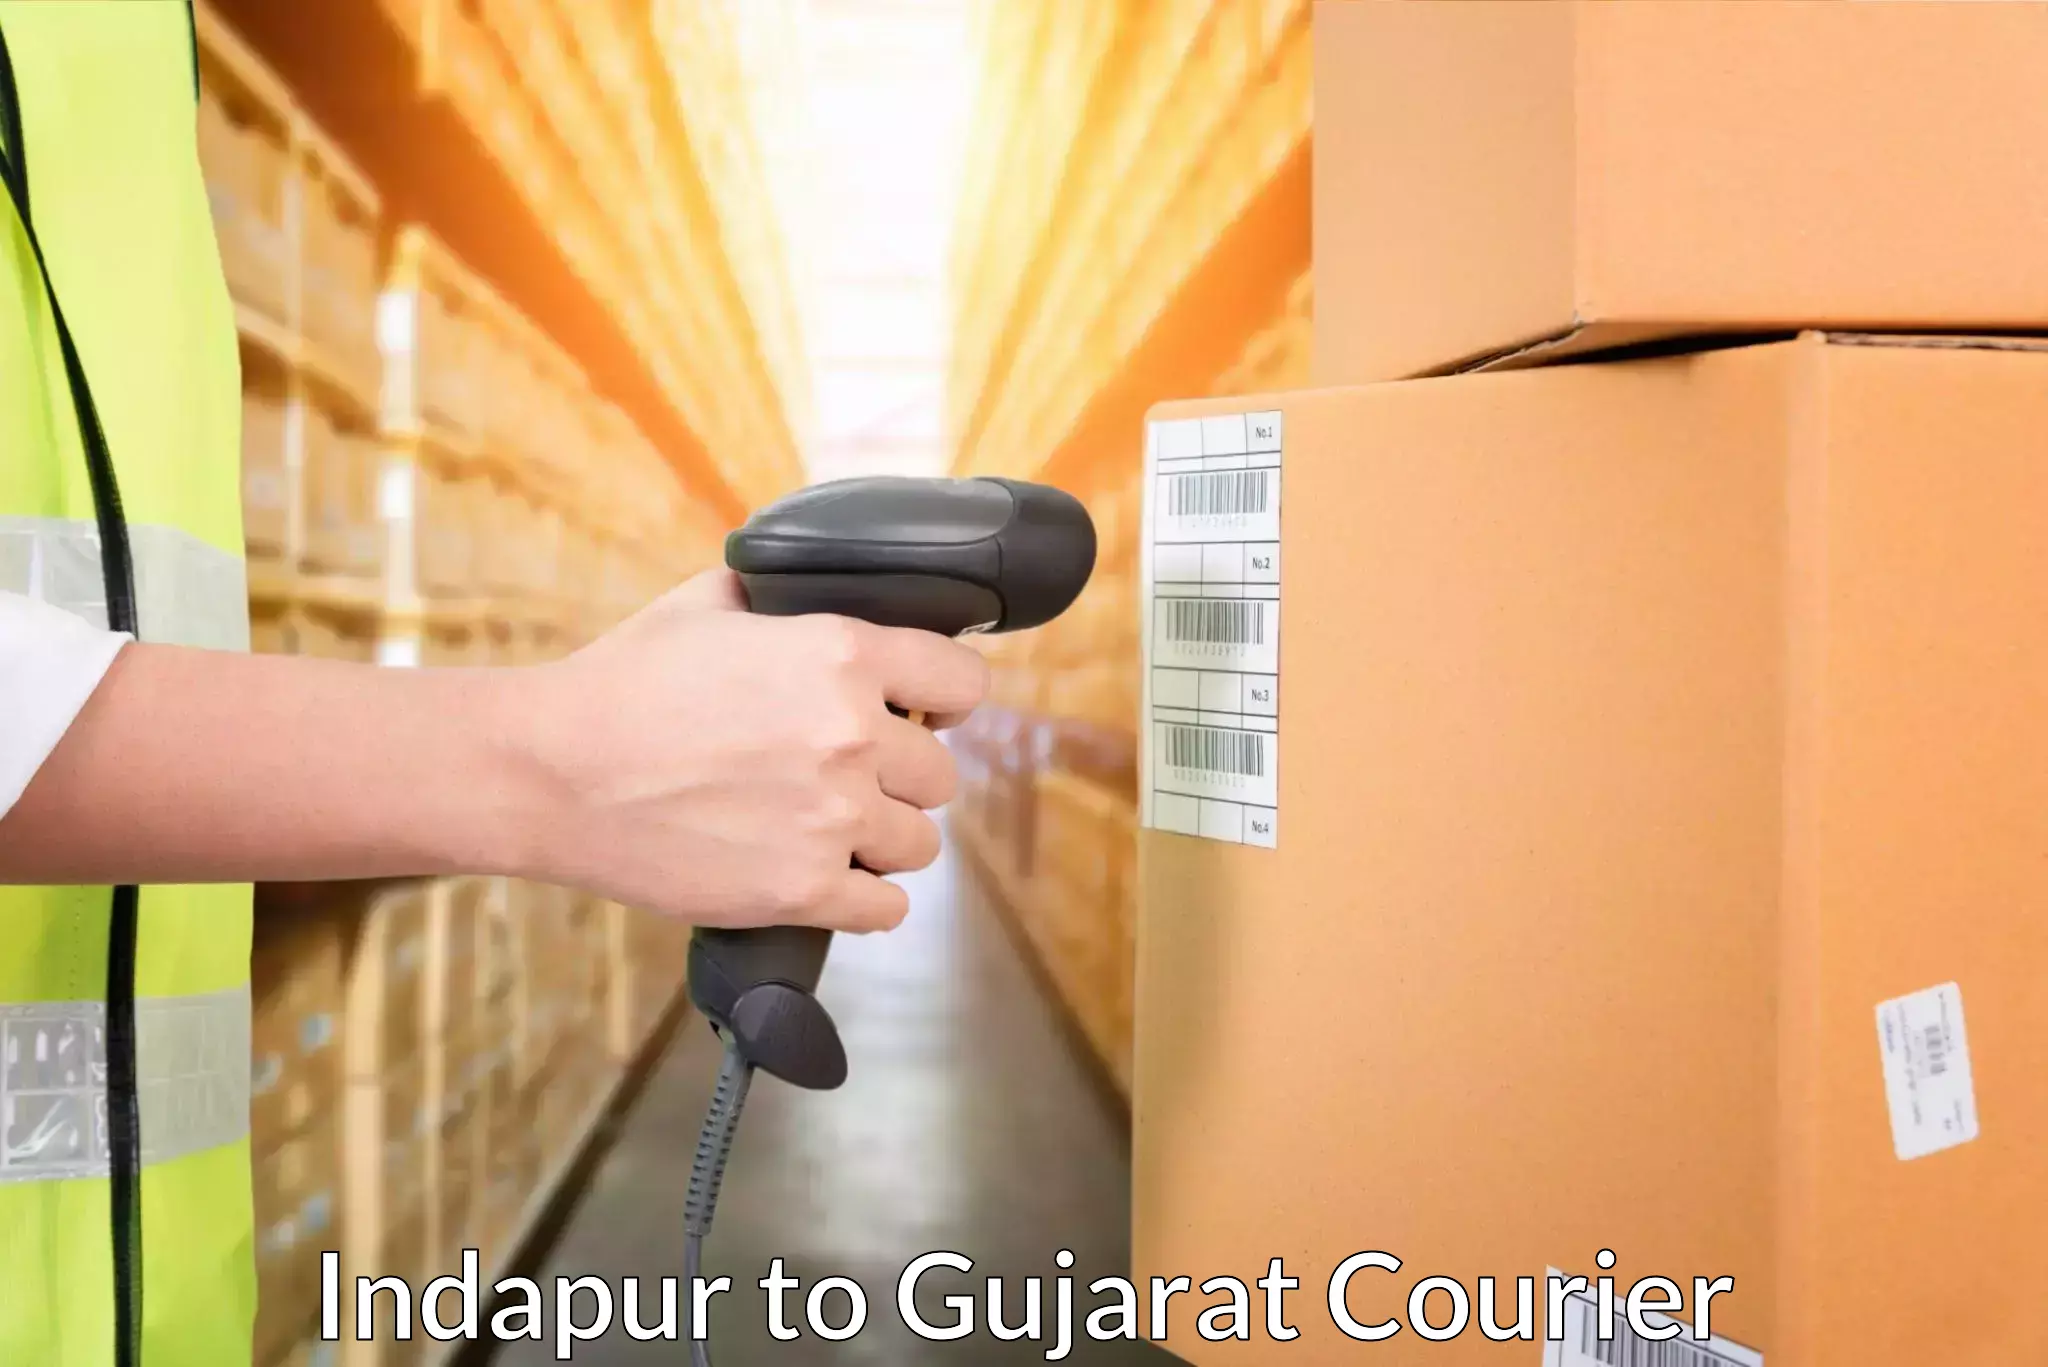 On-call courier service Indapur to Vijapur